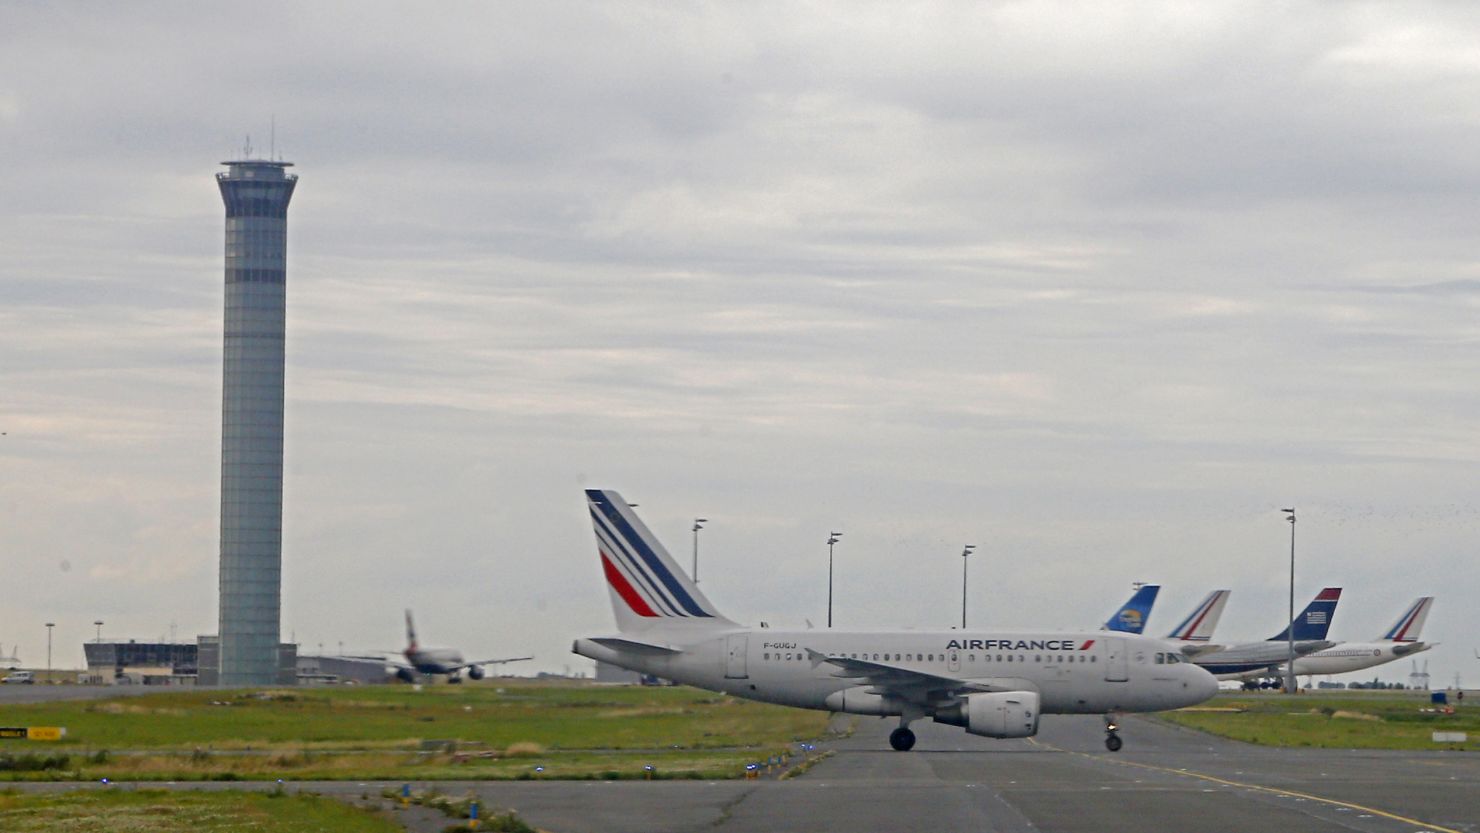 In the end, passengers of the Air France flight did not have to go into their pockets to help fuel the plane. (File)